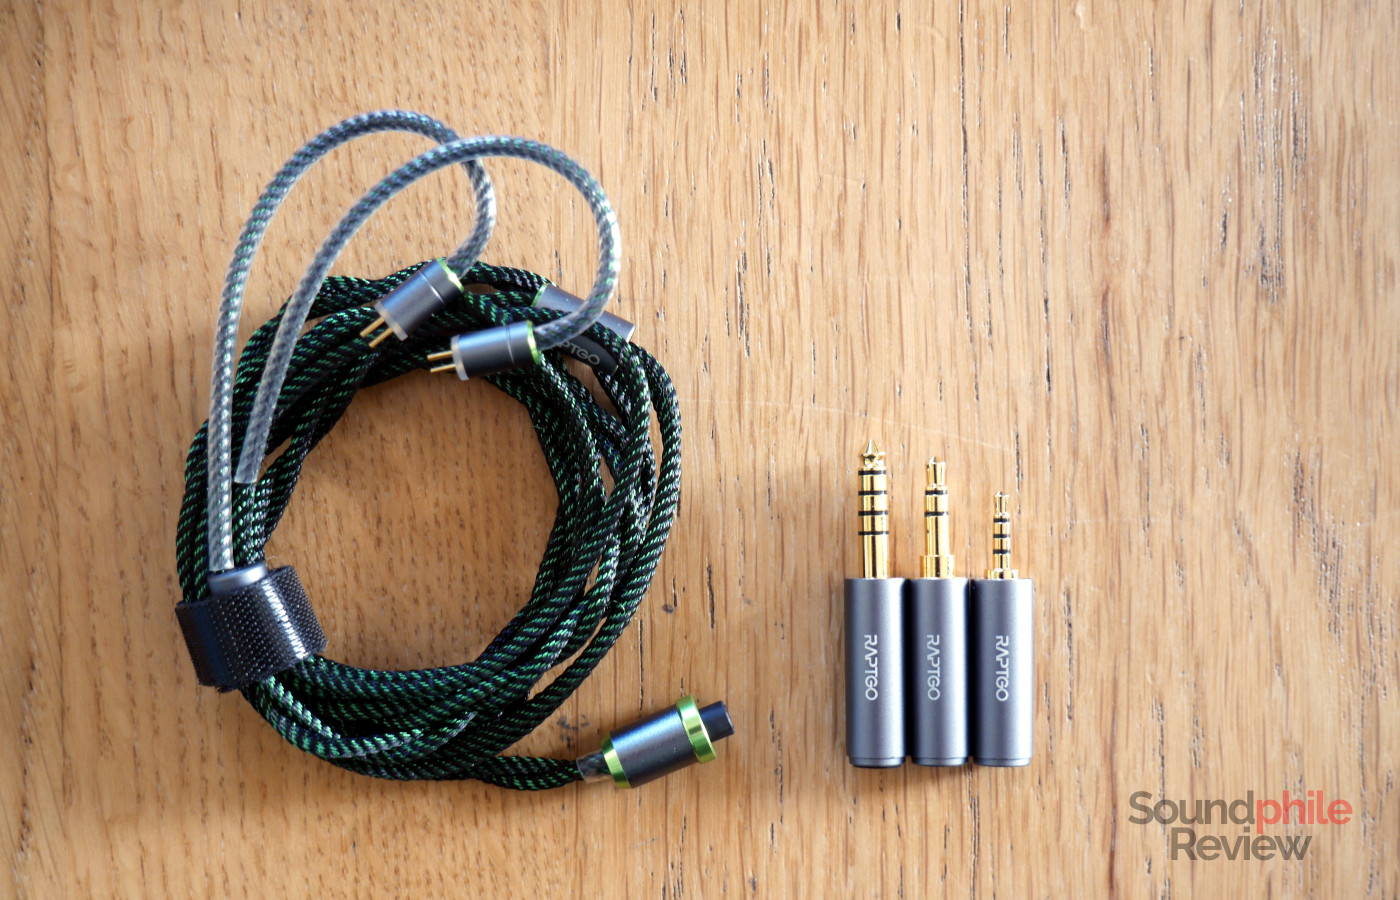 Th RAPTGO HOOK-X cable comes with three adapters: 2.5 mm, 3.5 mm and 4.4 mm